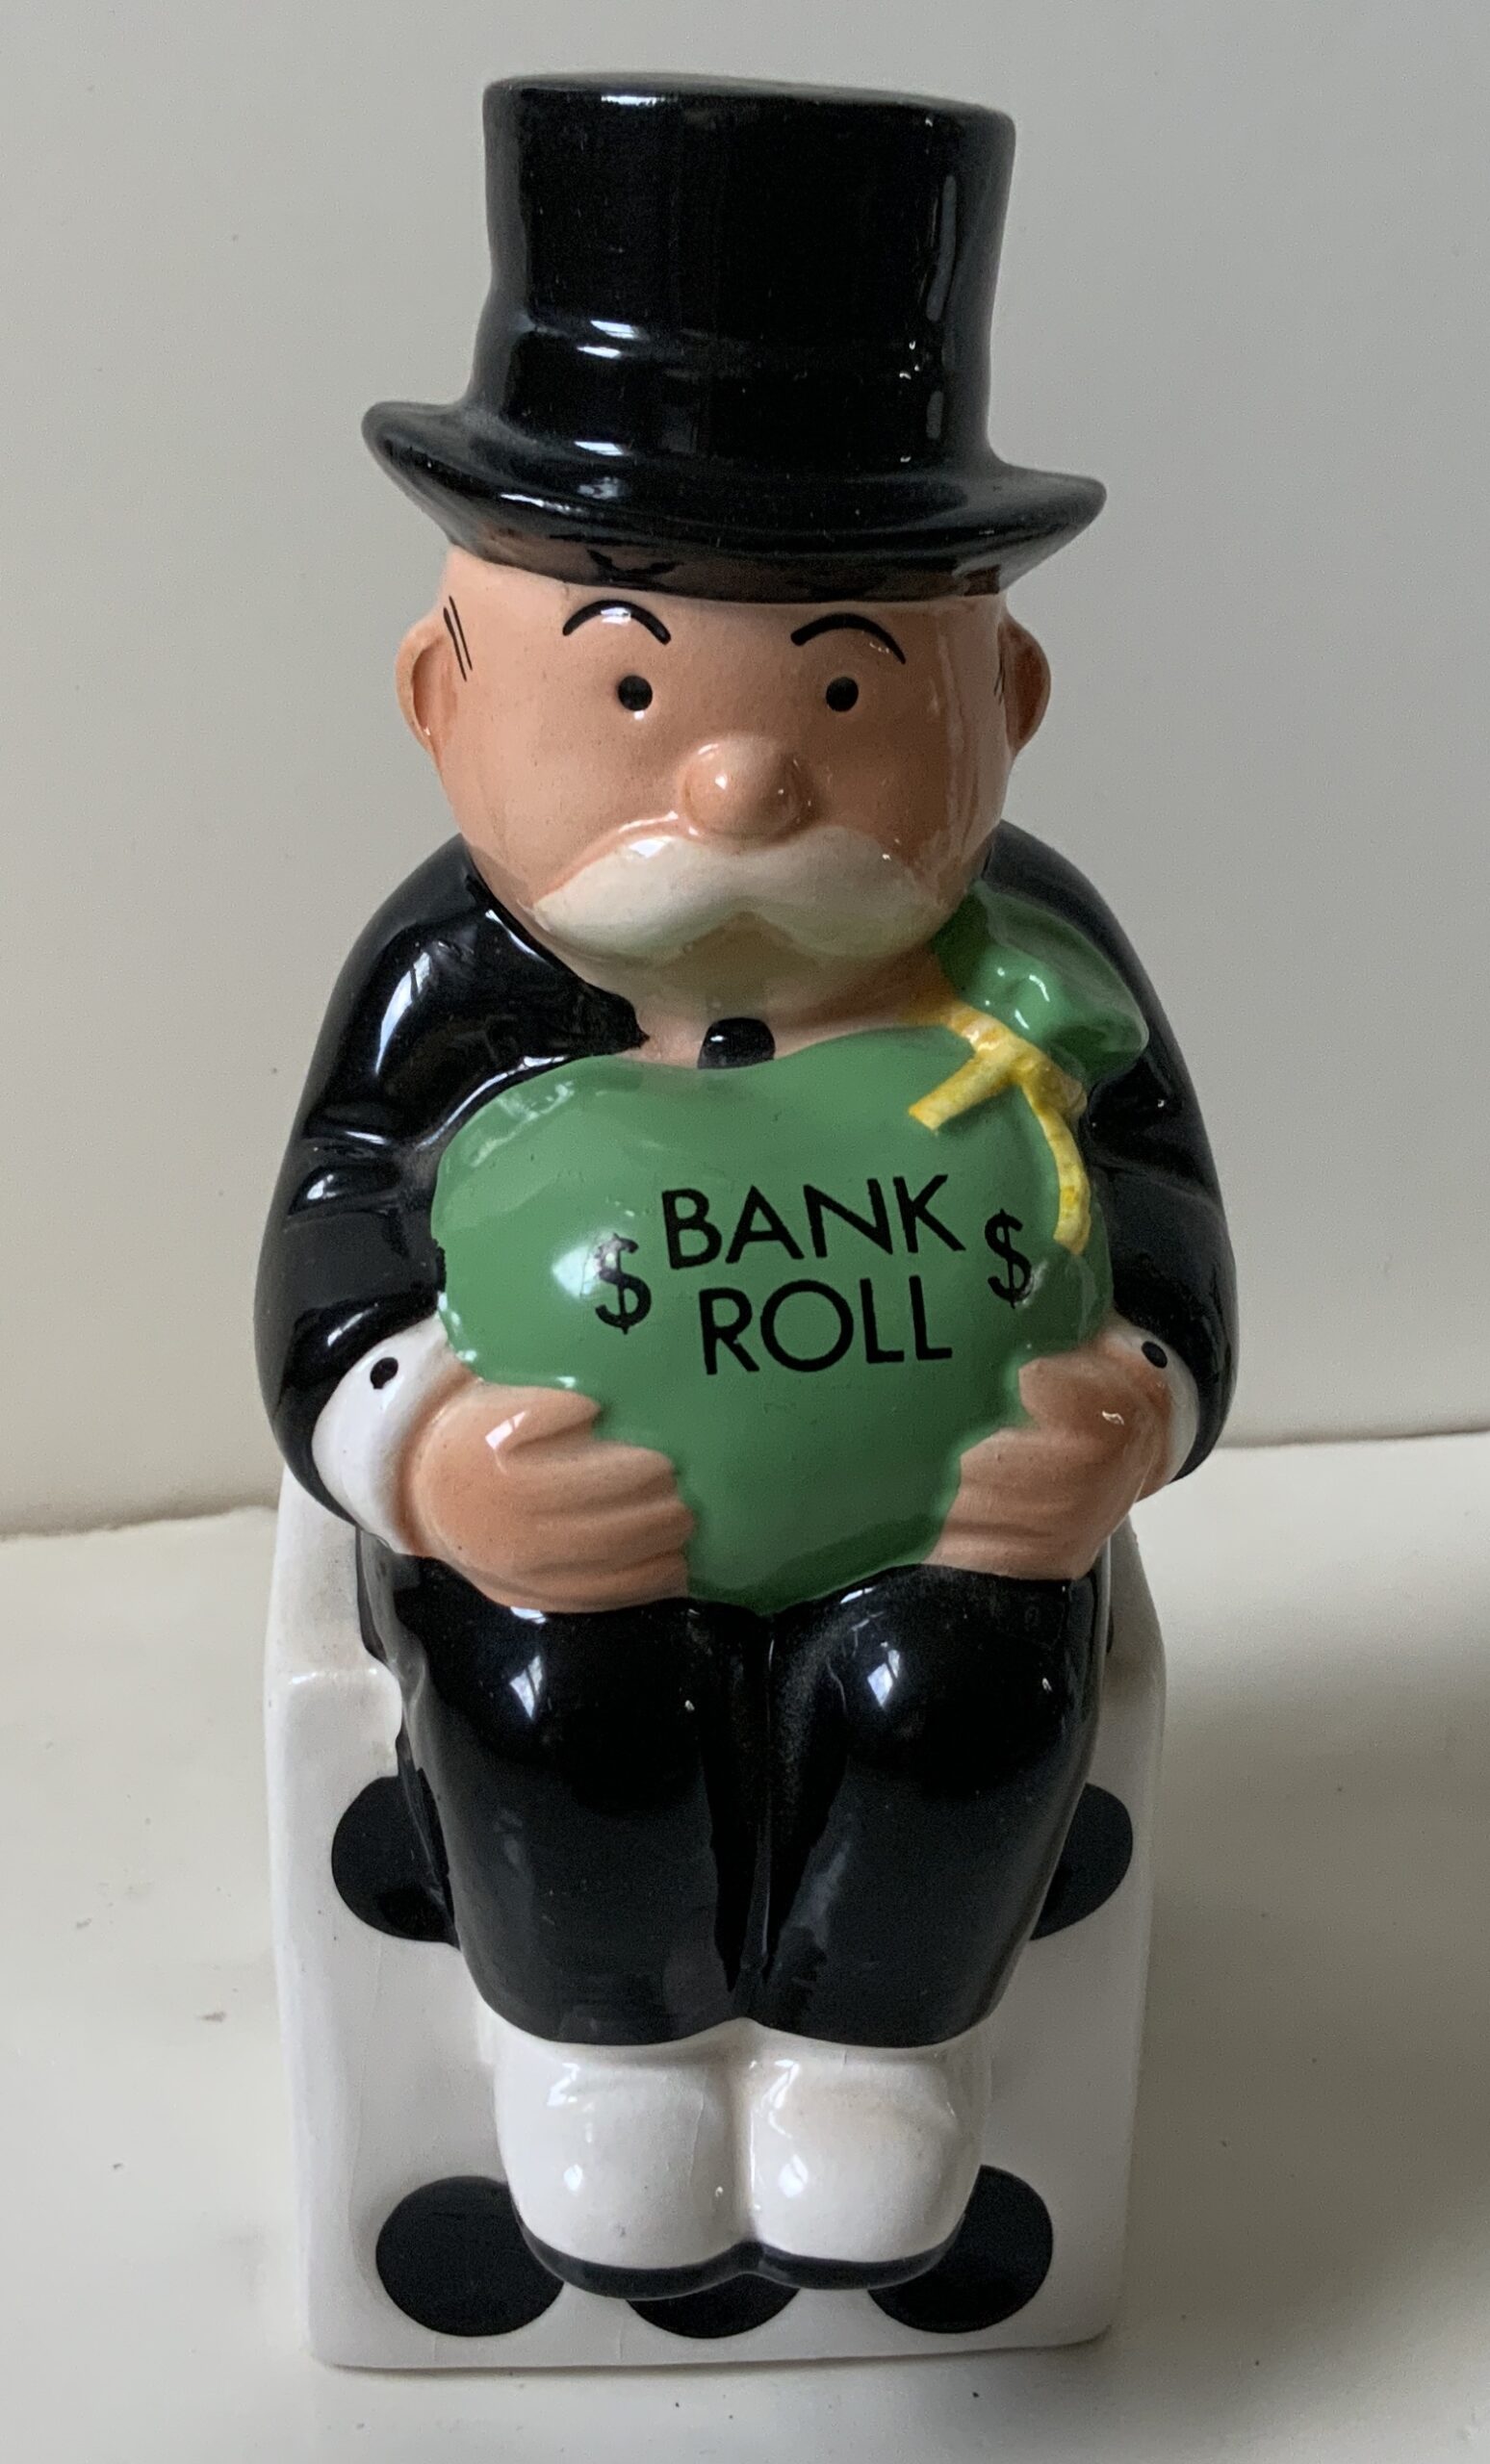 M247	RICH UNCLE PENNYBAGS A.K.A. “THE MONOPOLY GUY” CERAMIC BANK